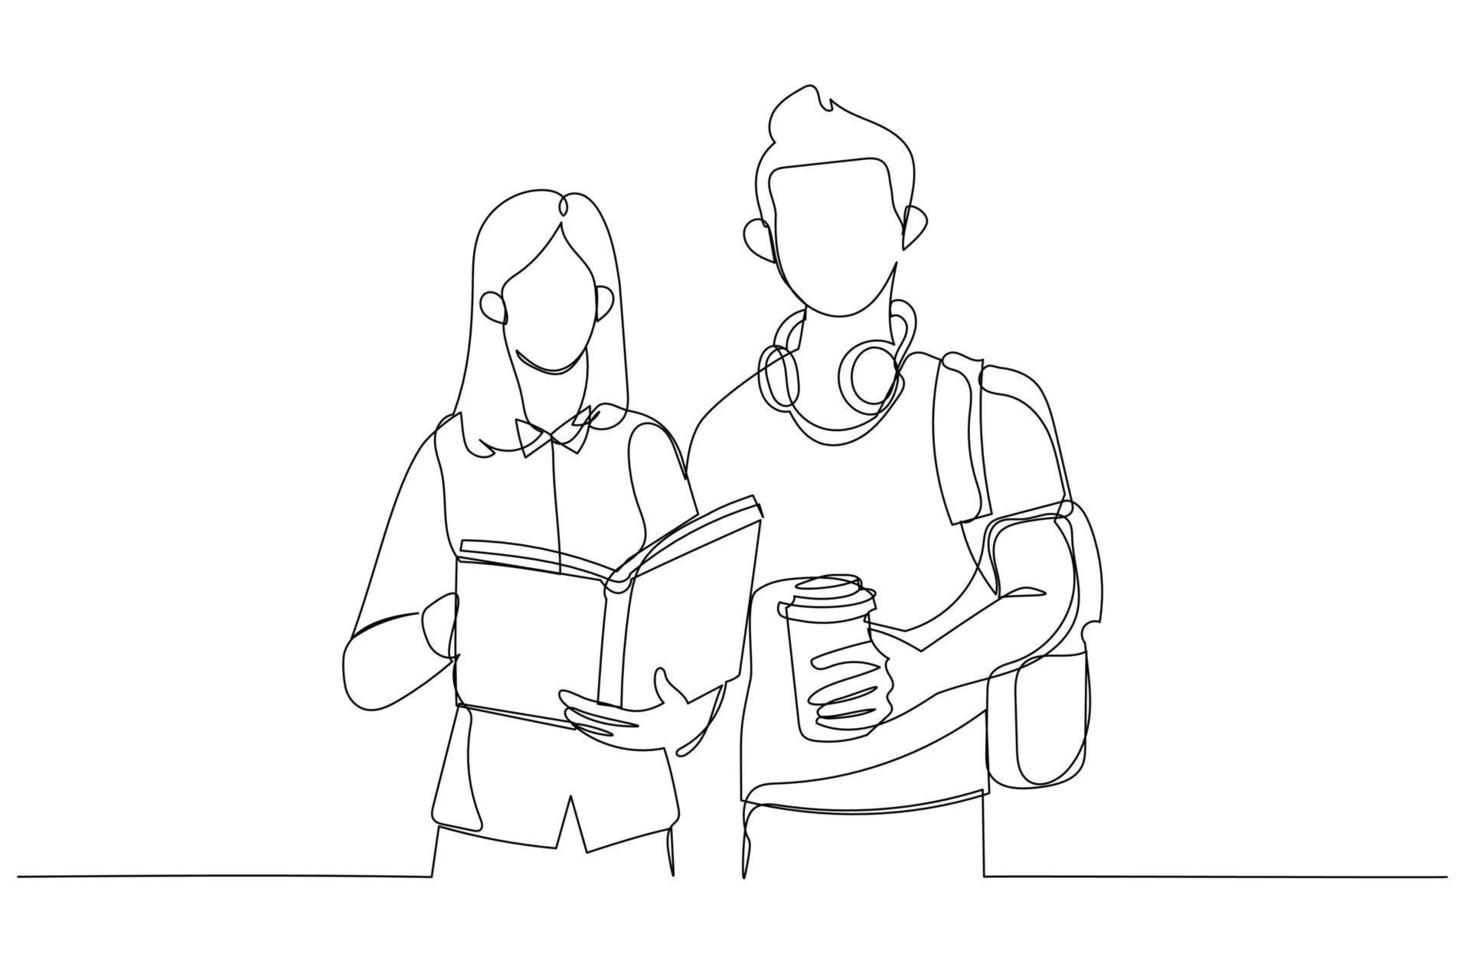 Illustration of friends girl and guy standing together searching books in library. Single line art style vector